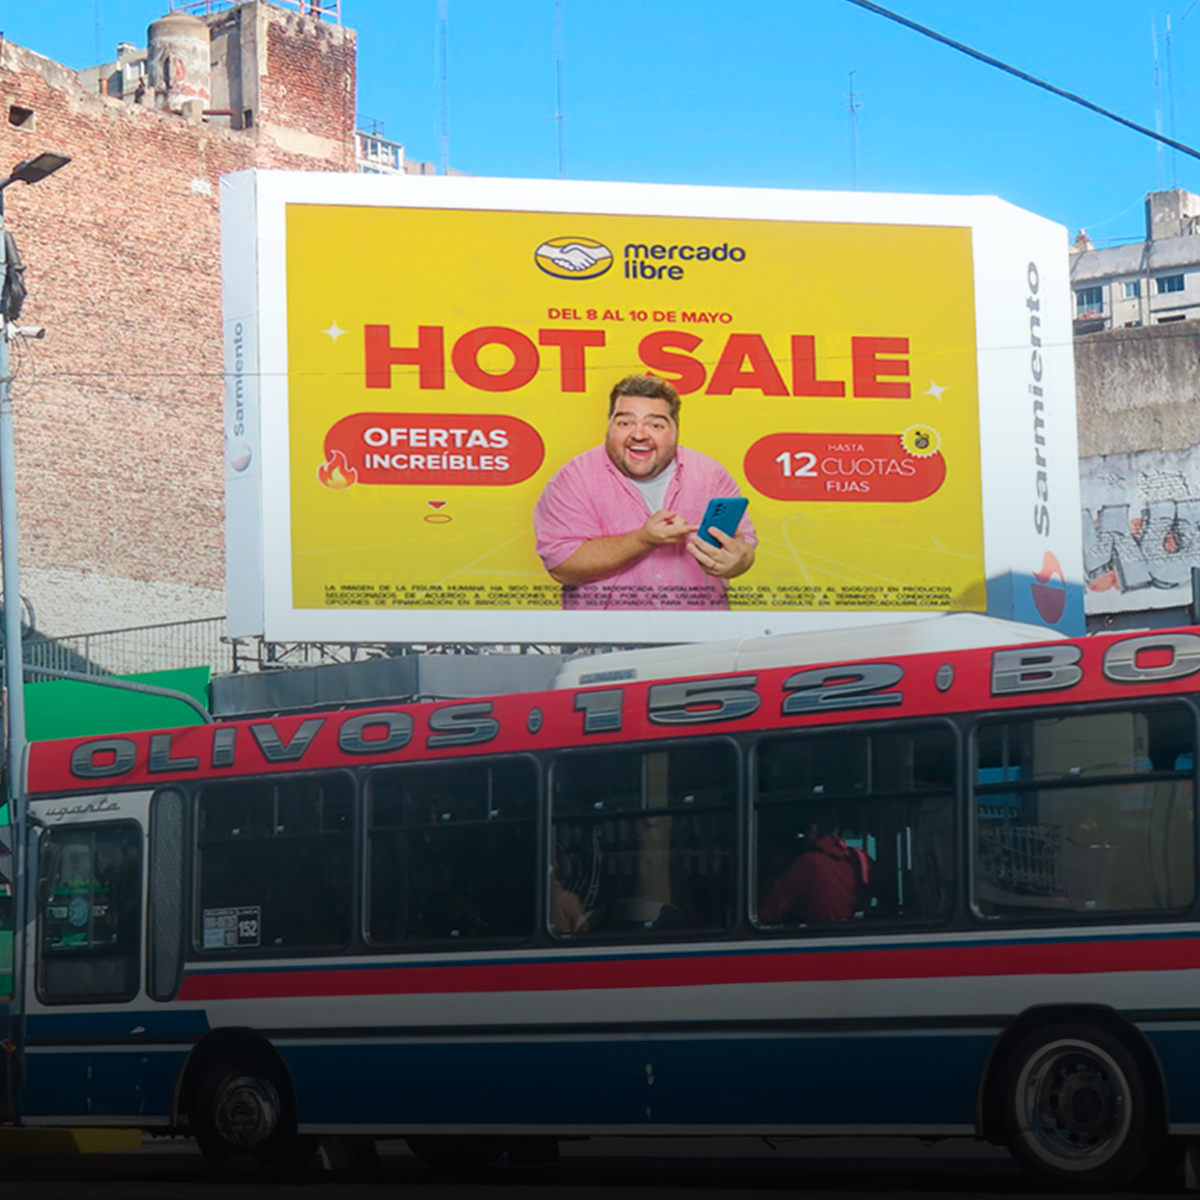 Mercado Libre made an impact with its flash dooh campaign during the Hot Sale